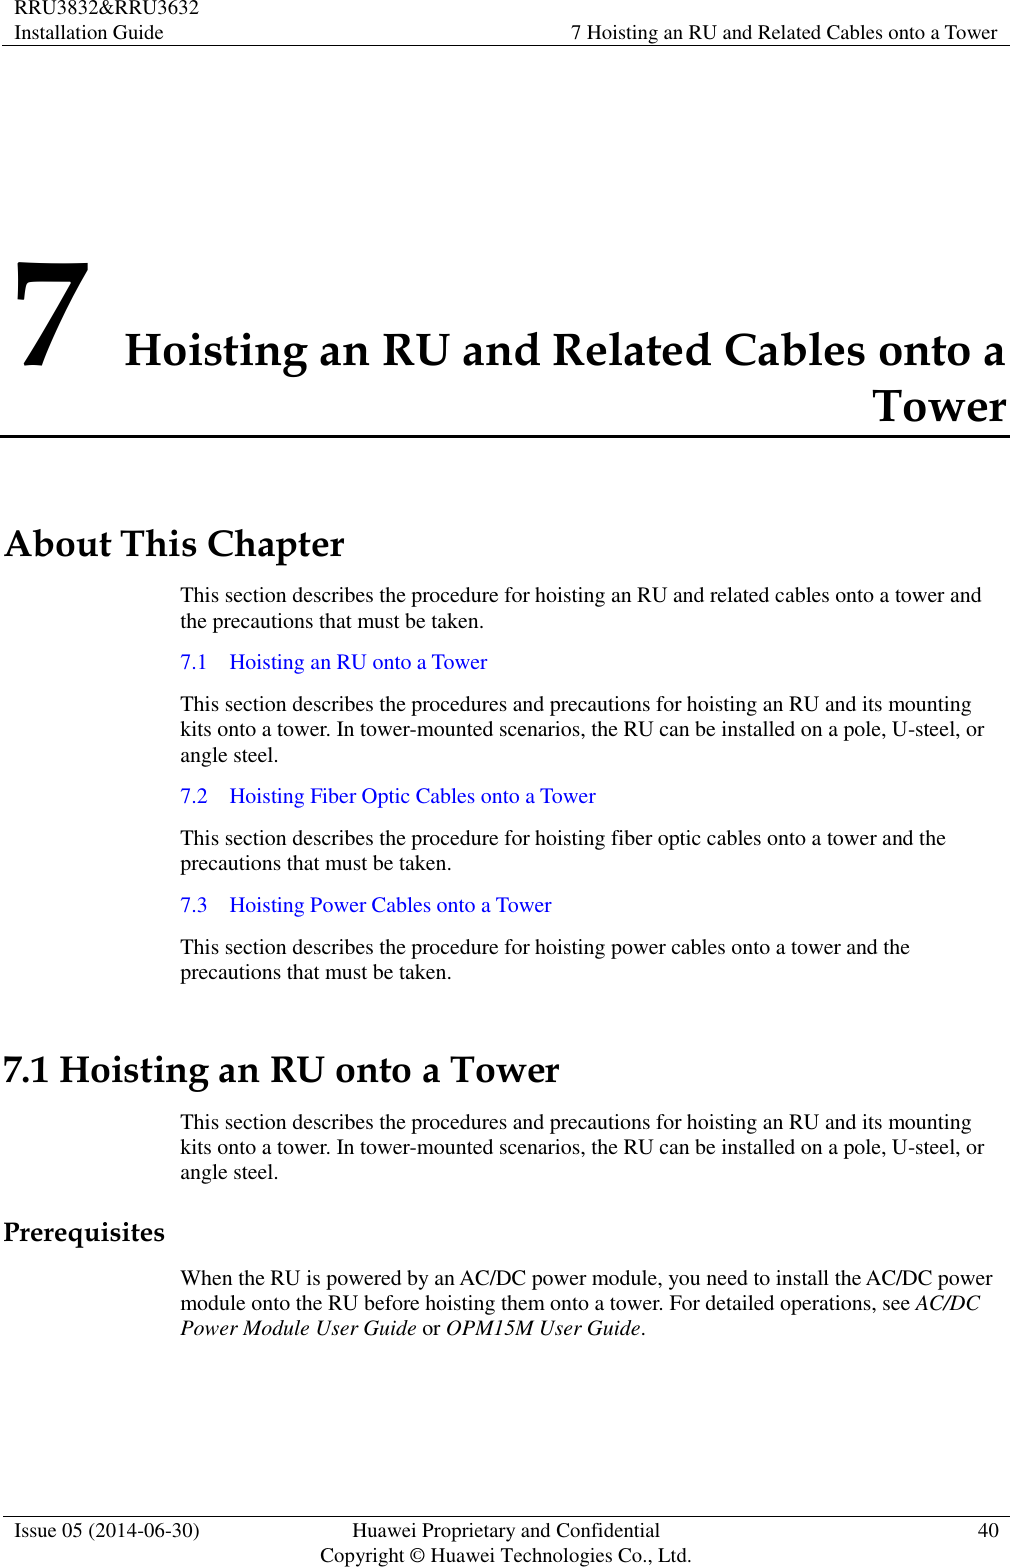 RRU3832&amp;RRU3632 Installation Guide 7 Hoisting an RU and Related Cables onto a Tower  Issue 05 (2014-06-30) Huawei Proprietary and Confidential                                     Copyright © Huawei Technologies Co., Ltd. 40  7 Hoisting an RU and Related Cables onto a Tower About This Chapter This section describes the procedure for hoisting an RU and related cables onto a tower and the precautions that must be taken. 7.1    Hoisting an RU onto a Tower This section describes the procedures and precautions for hoisting an RU and its mounting kits onto a tower. In tower-mounted scenarios, the RU can be installed on a pole, U-steel, or angle steel. 7.2    Hoisting Fiber Optic Cables onto a Tower This section describes the procedure for hoisting fiber optic cables onto a tower and the precautions that must be taken. 7.3    Hoisting Power Cables onto a Tower This section describes the procedure for hoisting power cables onto a tower and the precautions that must be taken. 7.1 Hoisting an RU onto a Tower This section describes the procedures and precautions for hoisting an RU and its mounting kits onto a tower. In tower-mounted scenarios, the RU can be installed on a pole, U-steel, or angle steel. Prerequisites When the RU is powered by an AC/DC power module, you need to install the AC/DC power module onto the RU before hoisting them onto a tower. For detailed operations, see AC/DC Power Module User Guide or OPM15M User Guide.  